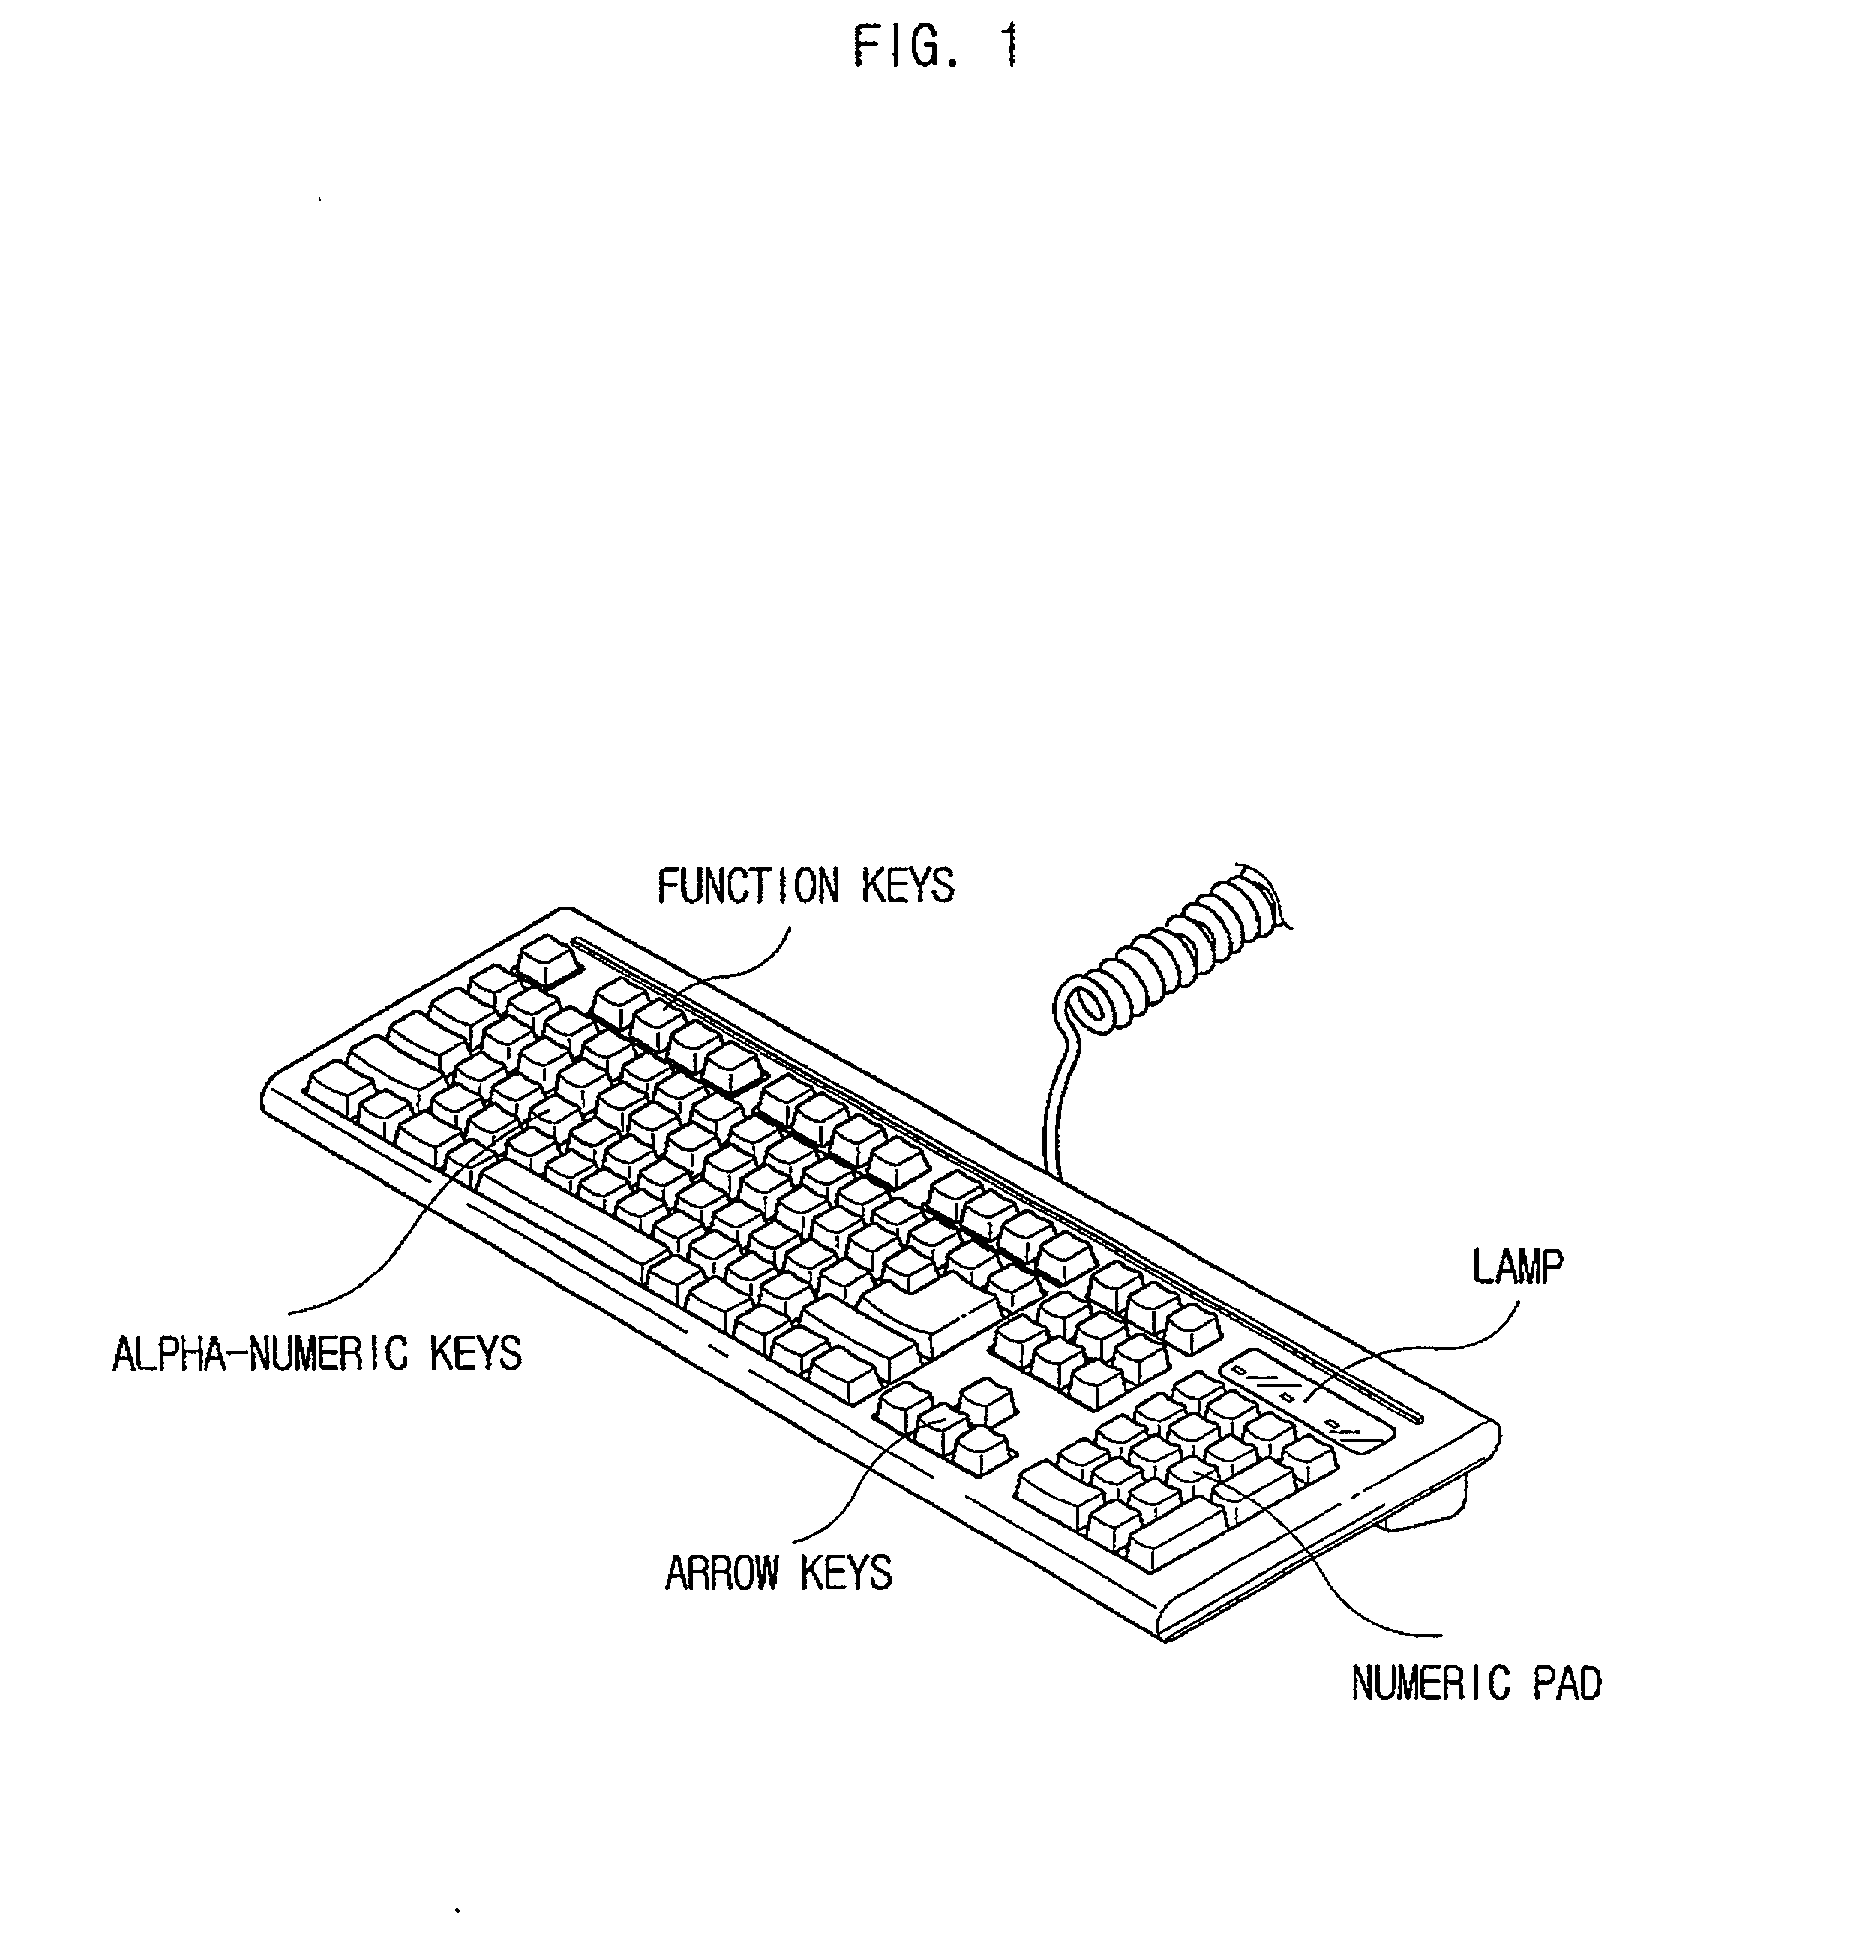 Wireless keyboard with a built-in web camera